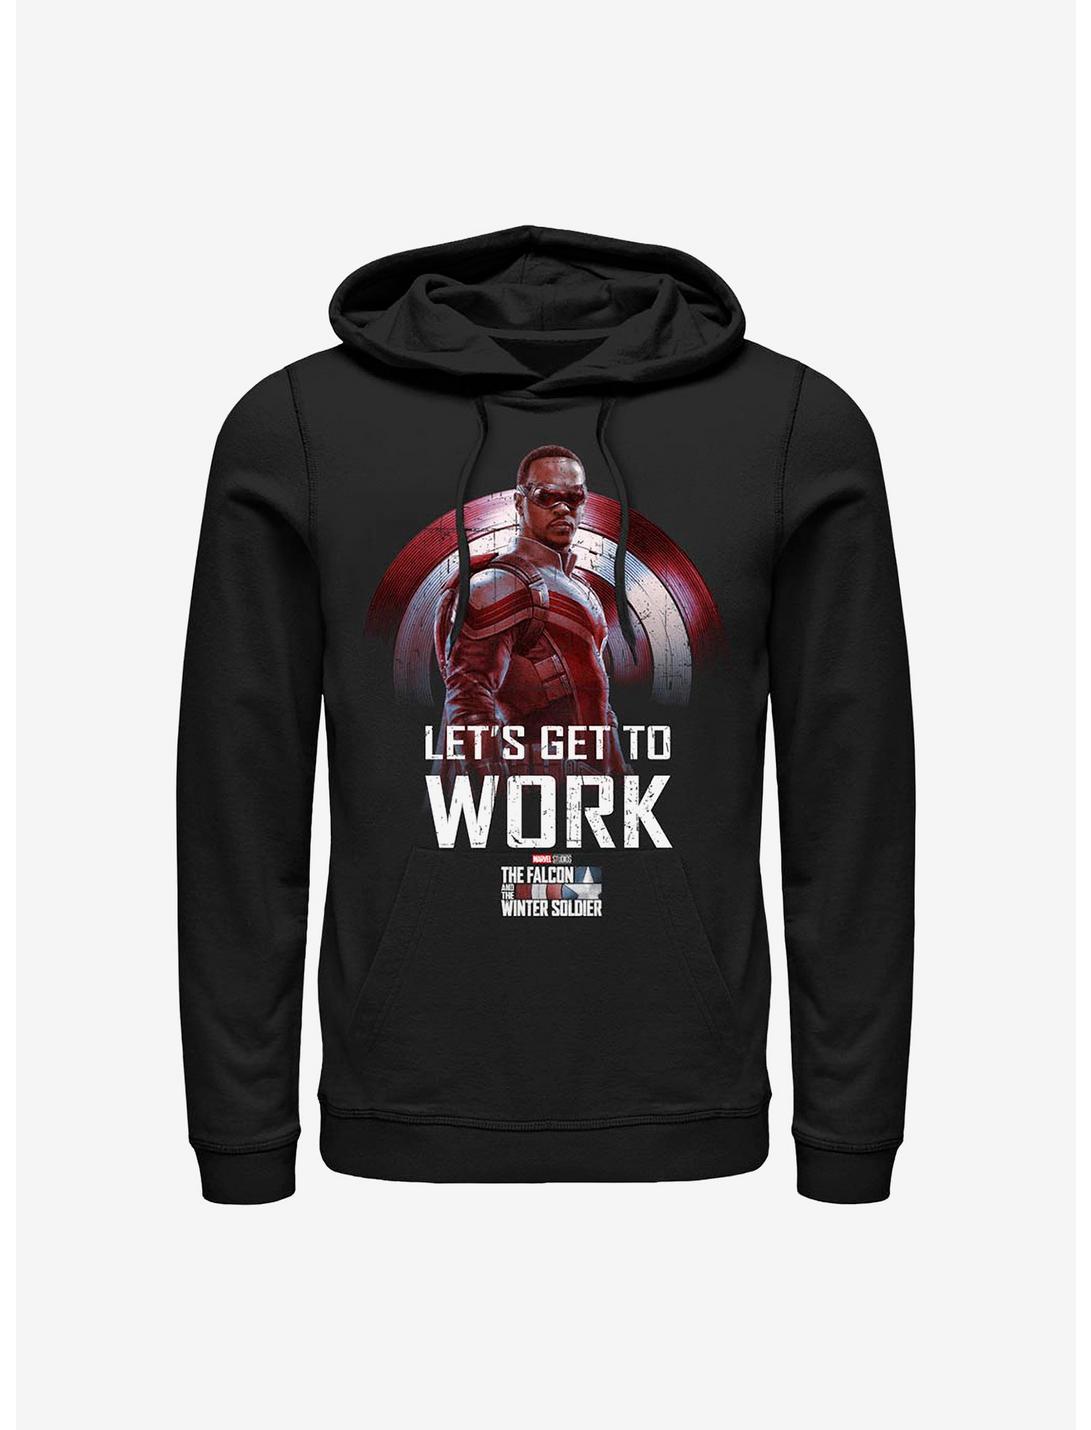 Marvel The Falcon And The Winter Soldier Let's Get To Work Hoodie, BLACK, hi-res